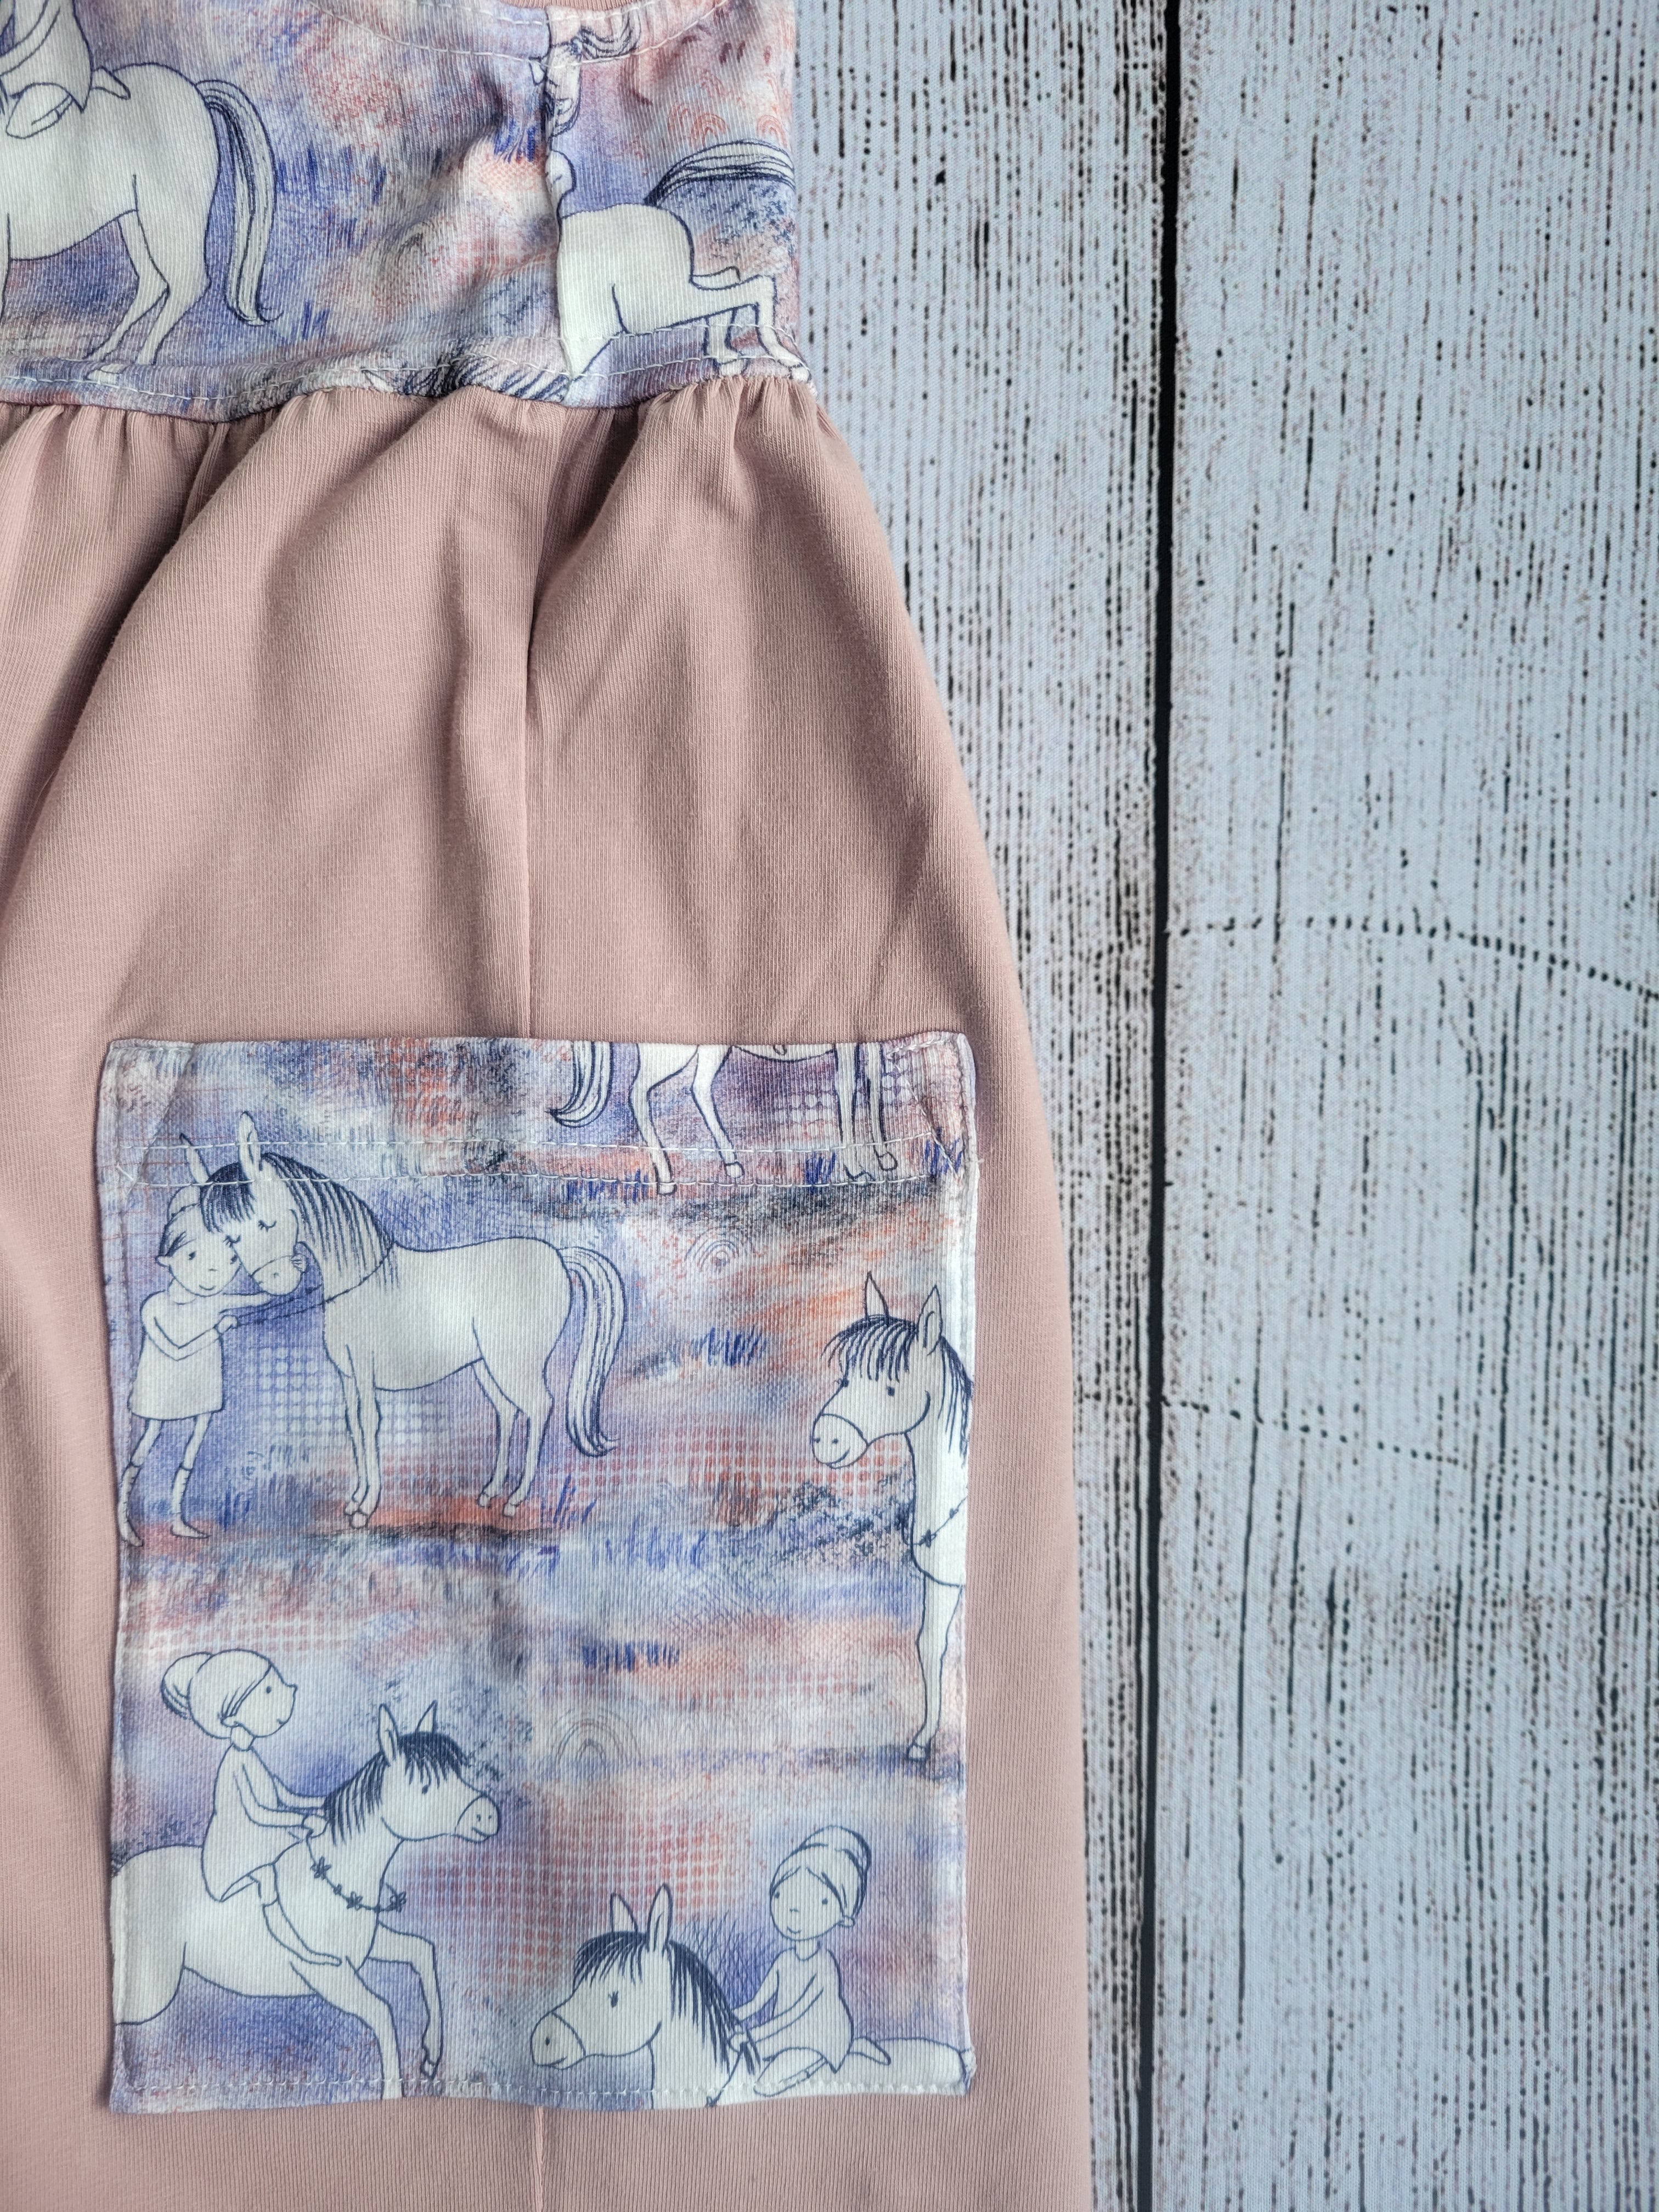 Ponies Bodice with Blush Pink Skirt Dress